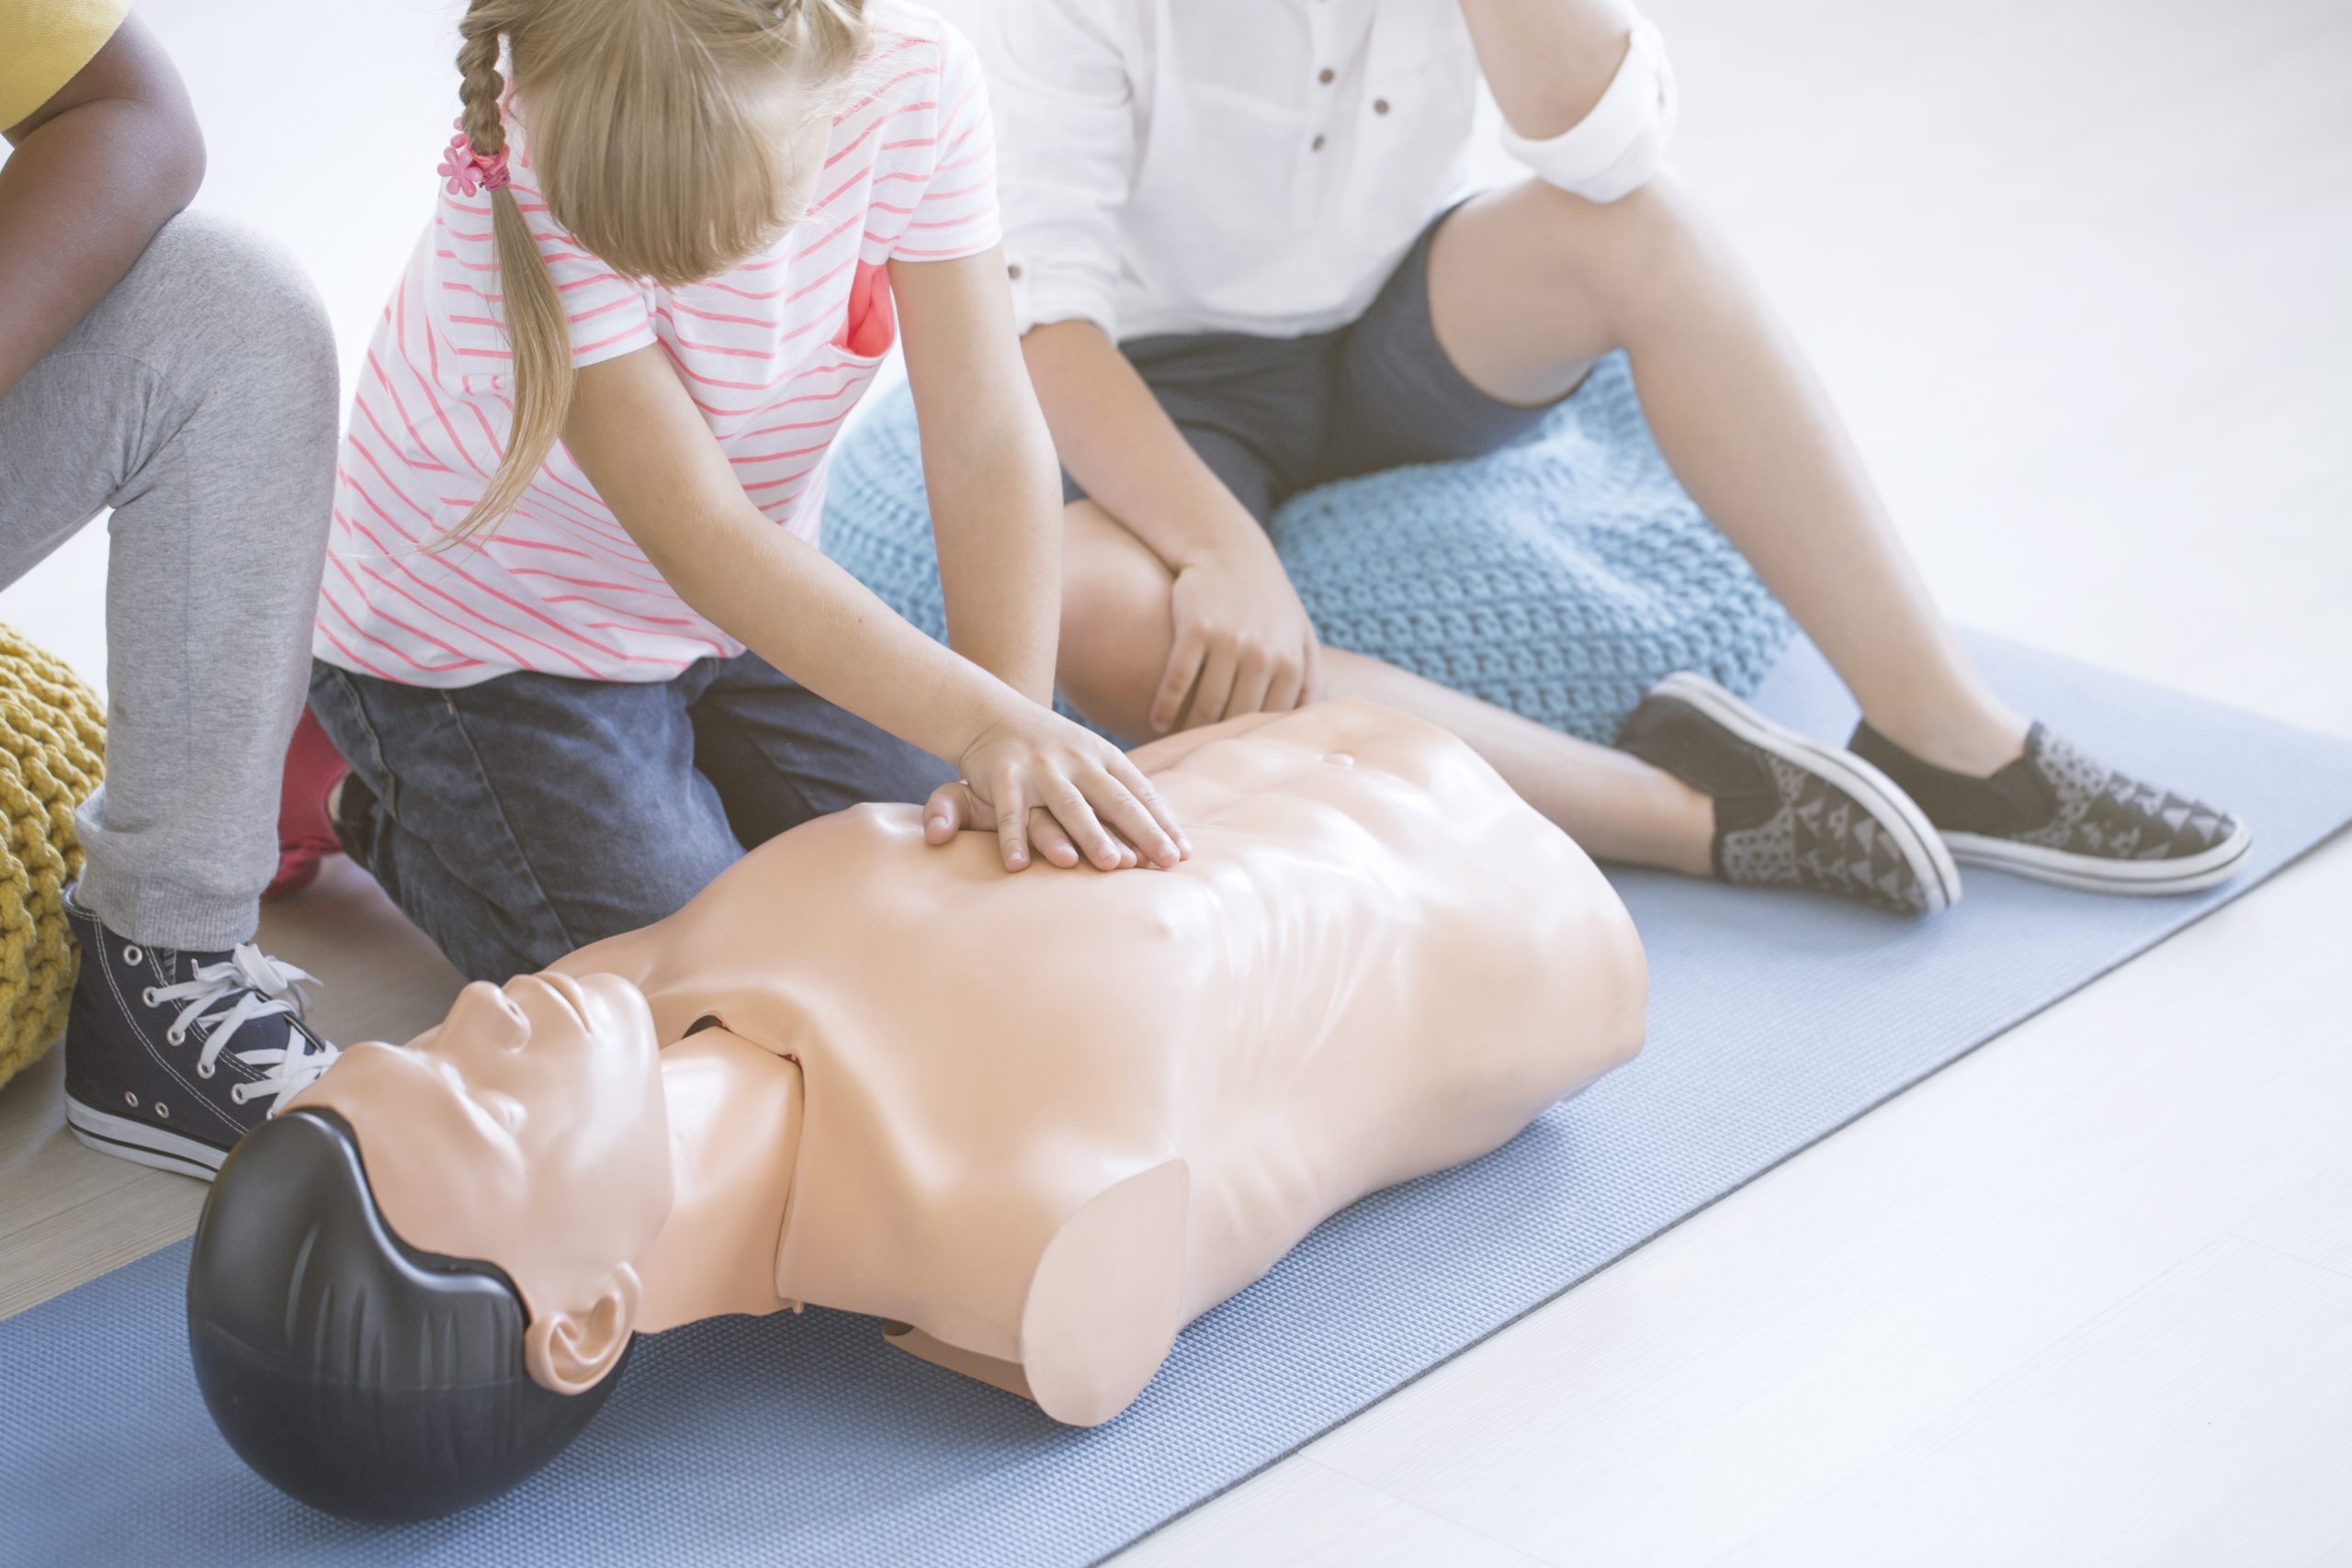 Young girl performing cpr